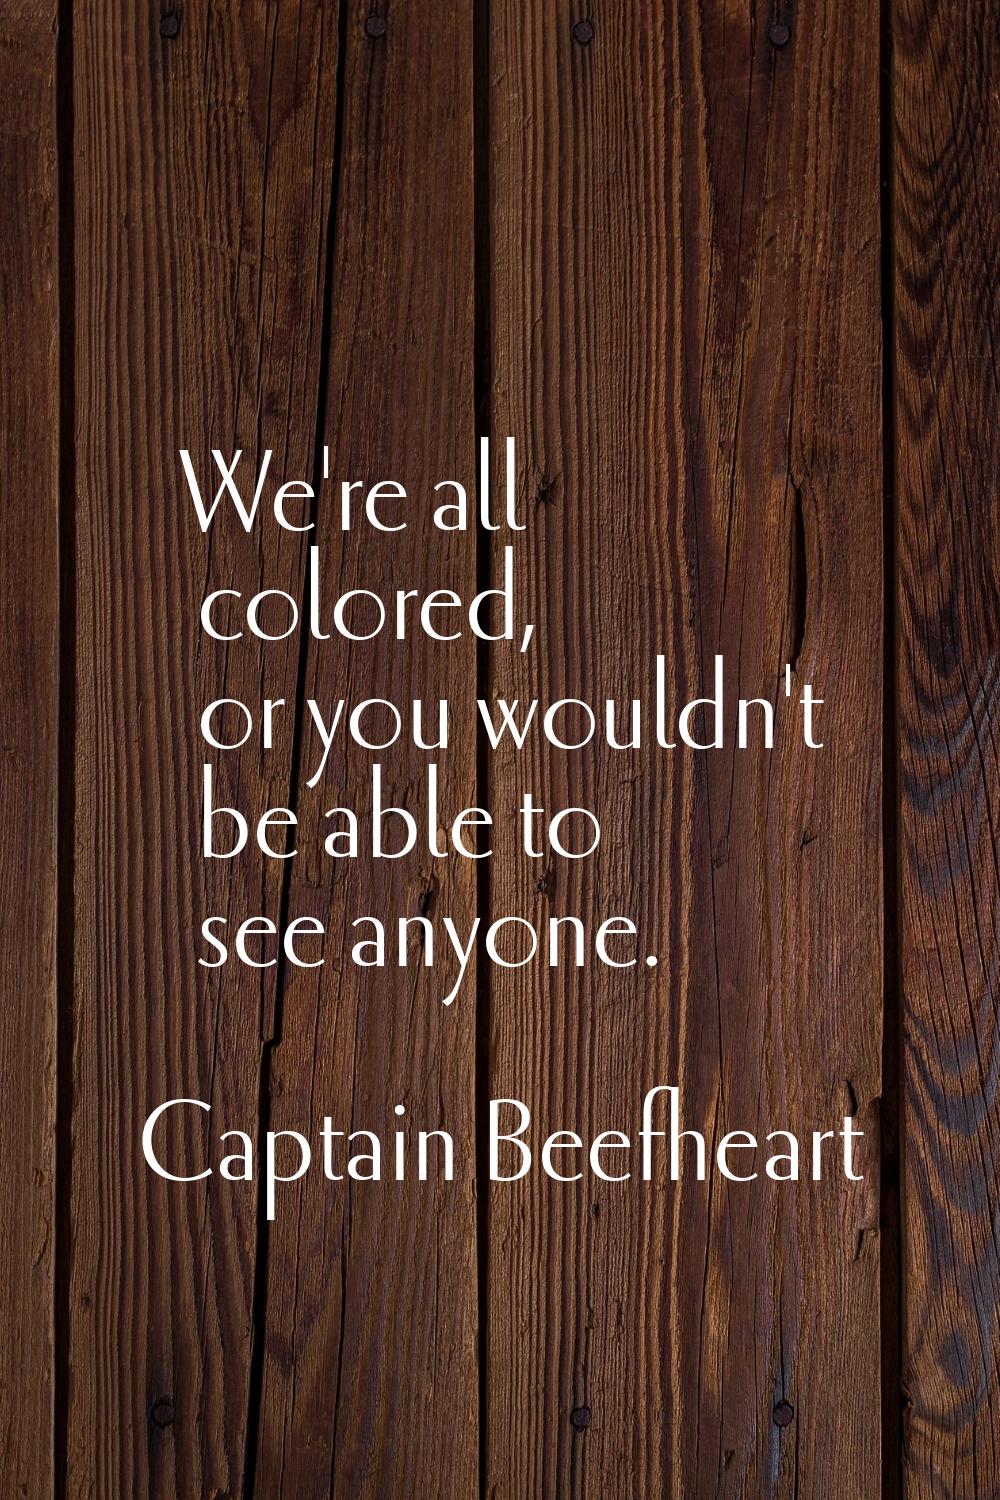 We're all colored, or you wouldn't be able to see anyone.